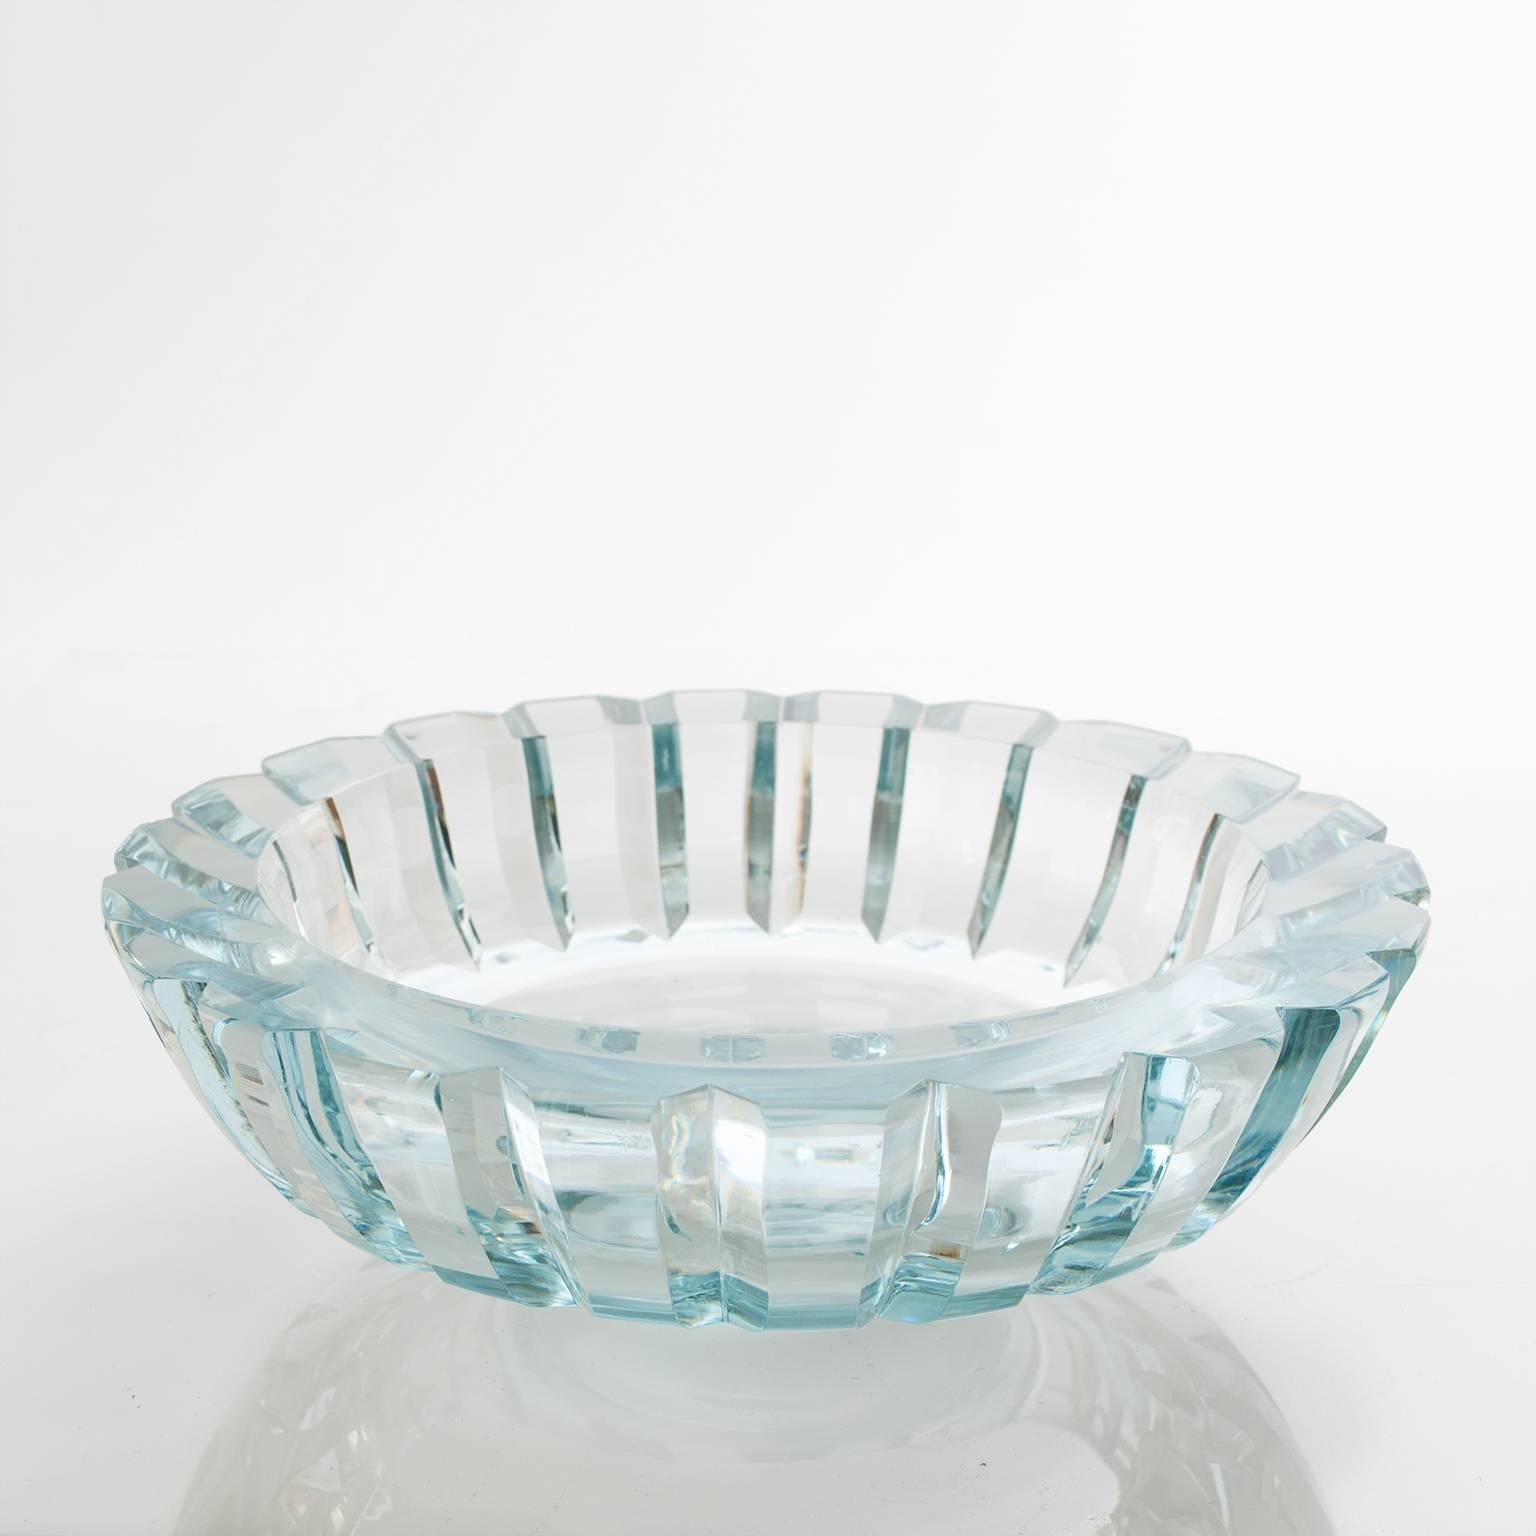 Scandinavian Modern faceted heavy crystal pale blue bowl from Kosta, Sweden, circa 1950.
Height: 3